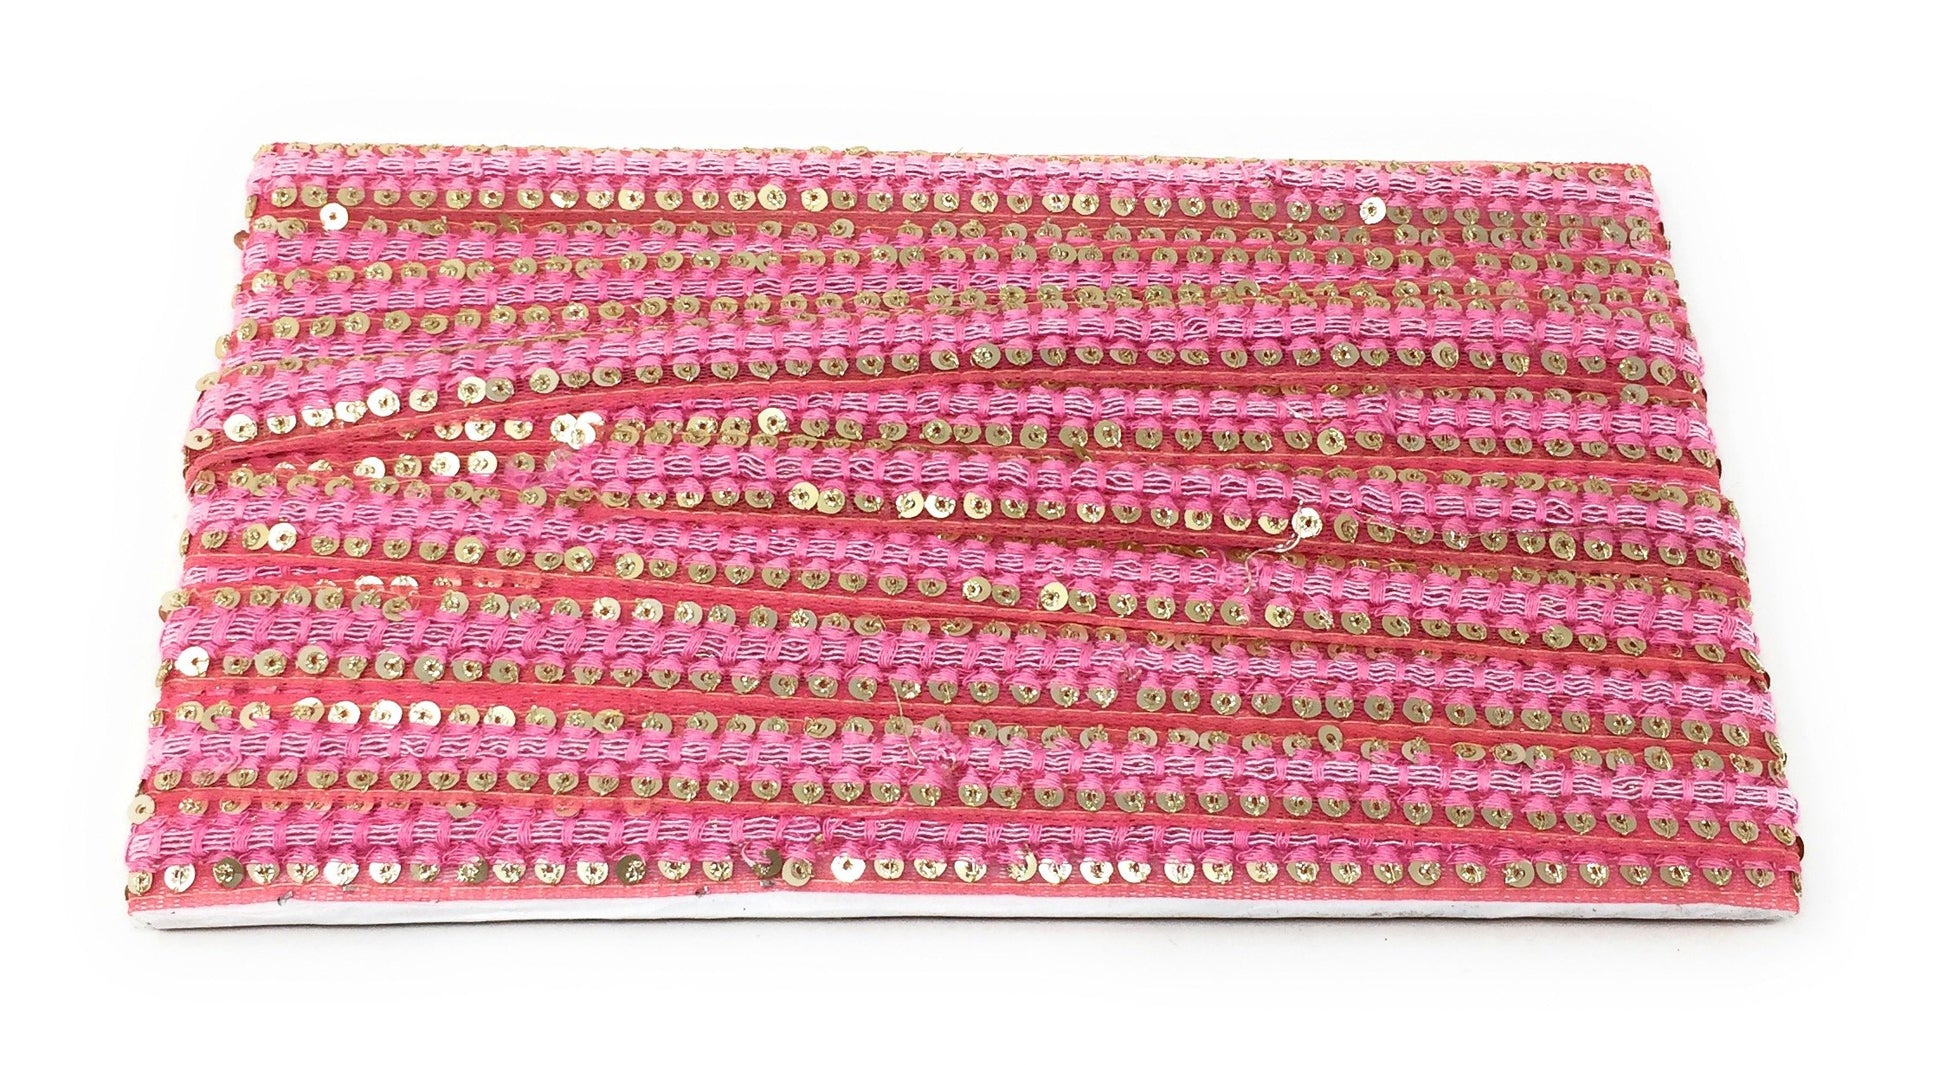 Rani Pink Sequins Embroidery Saree Border Trim - 9 Meter Roll